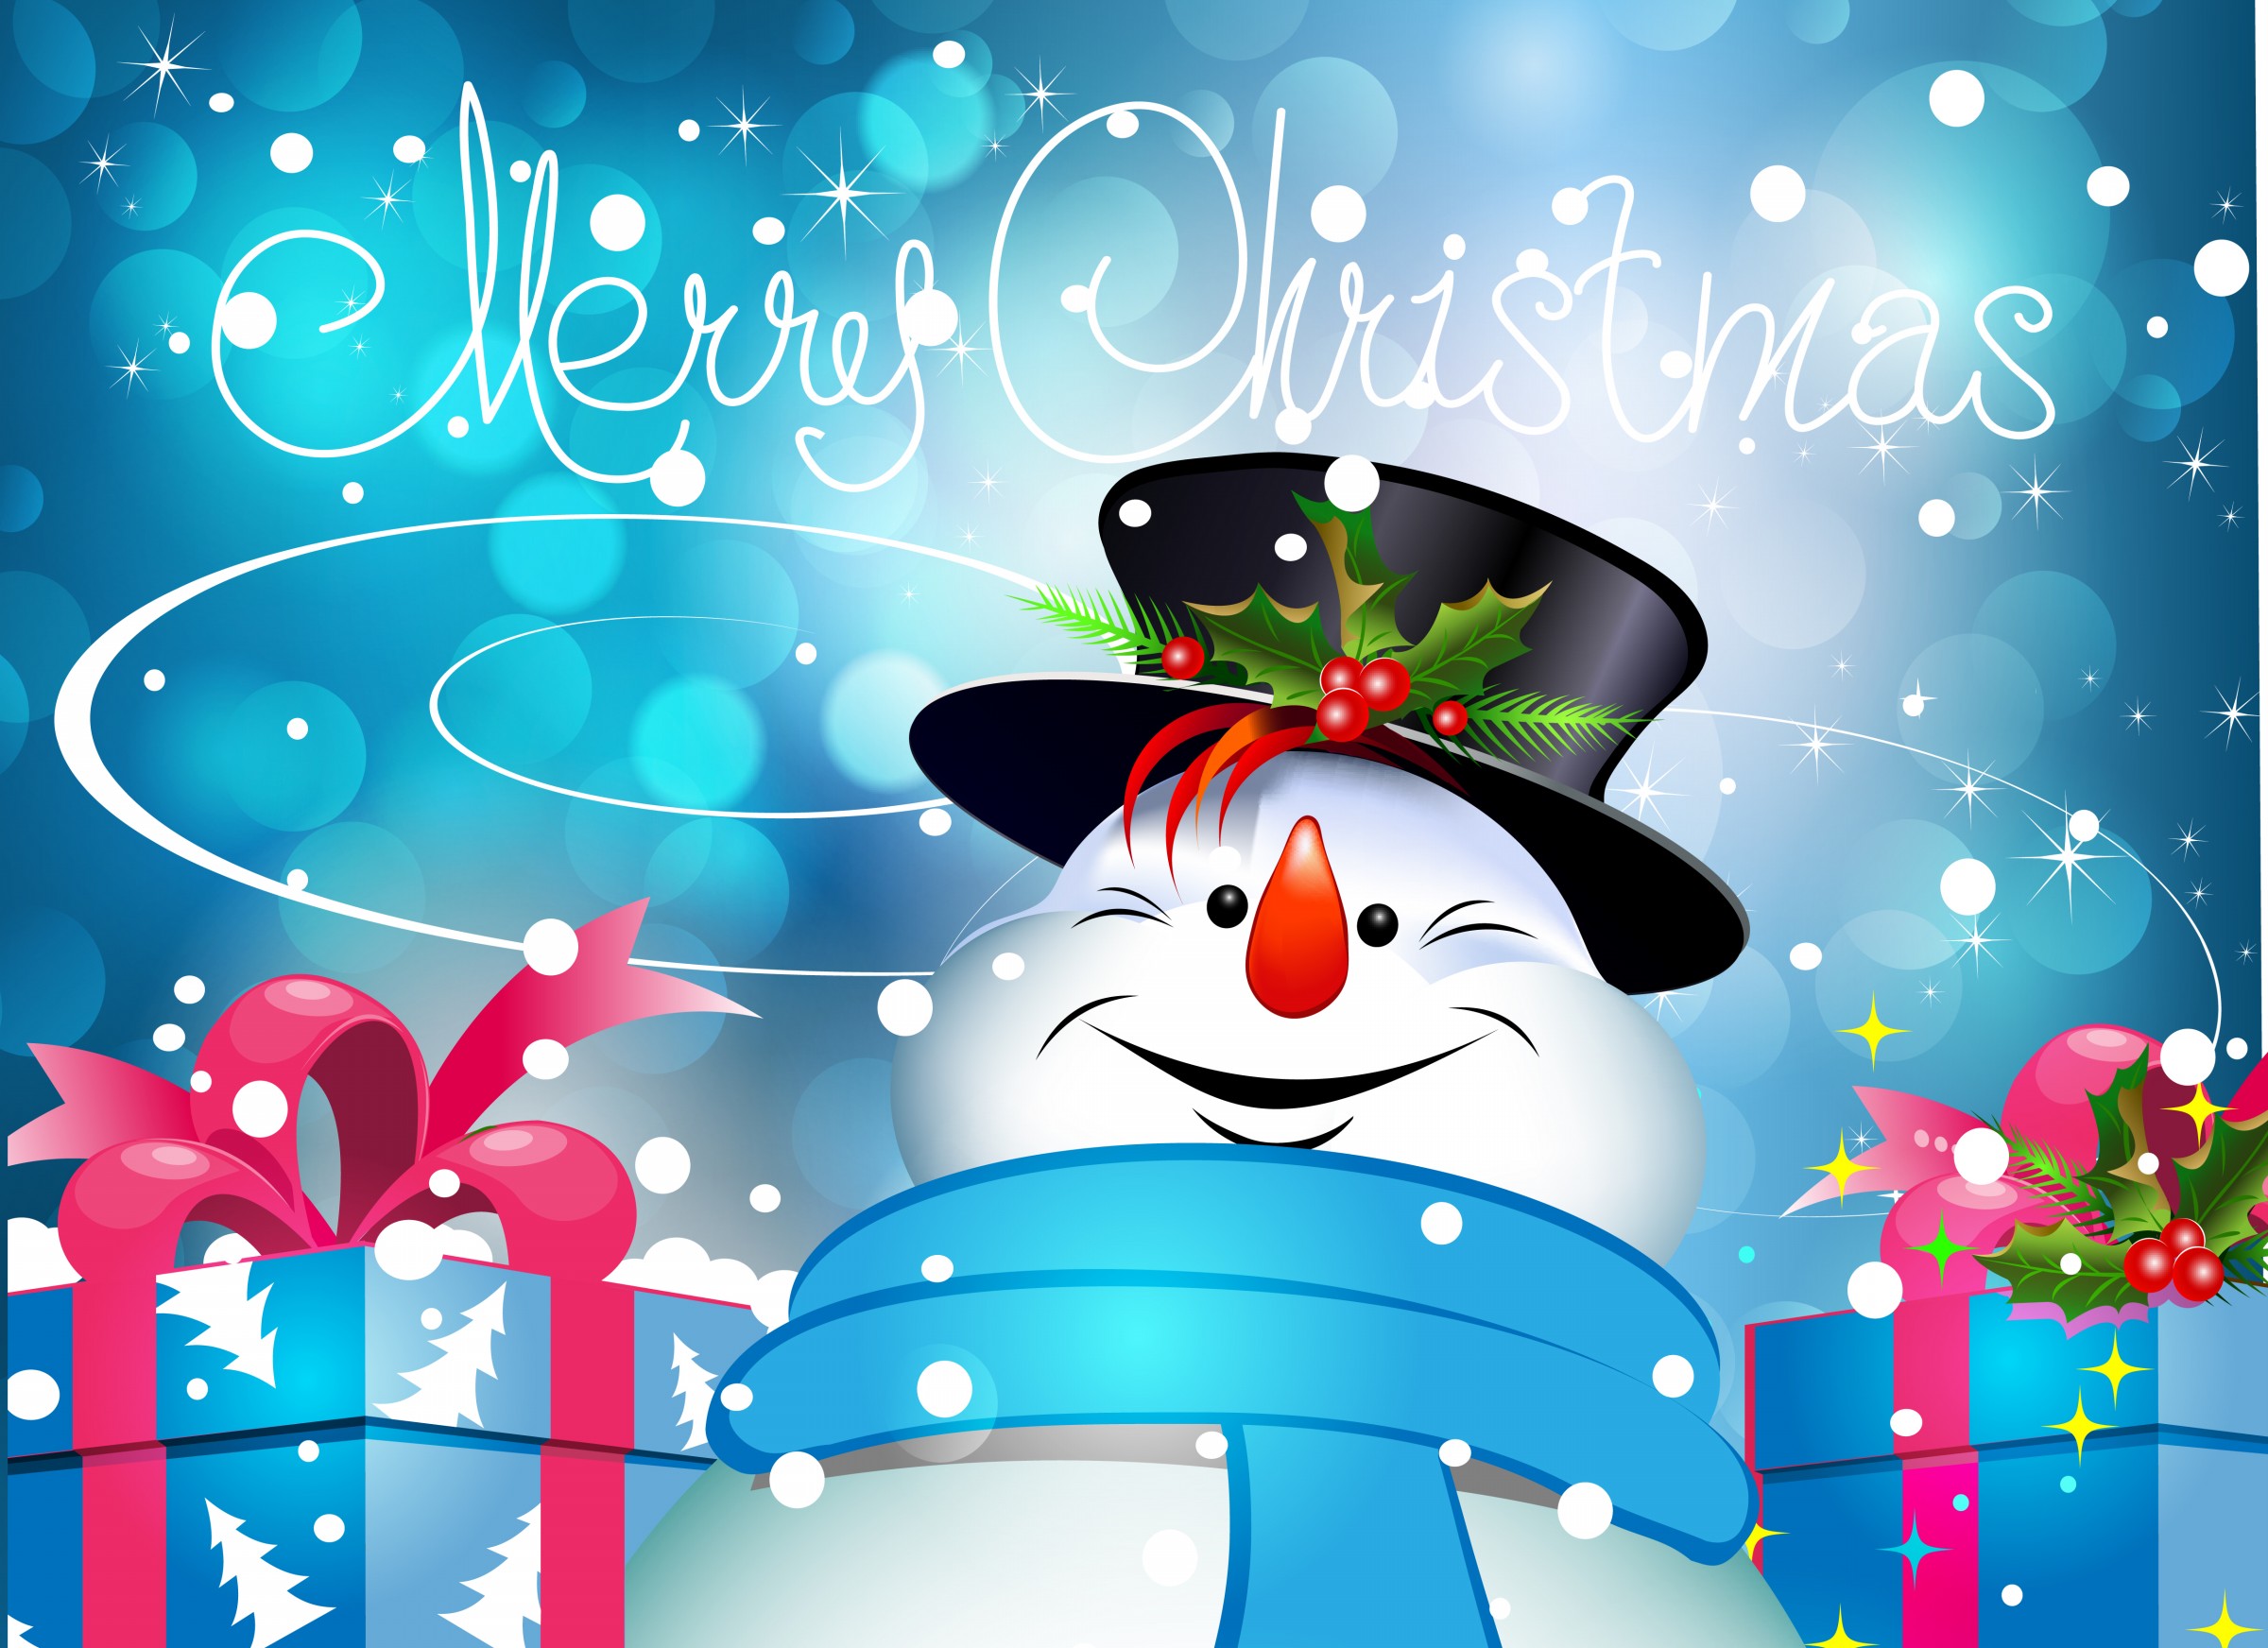 Christmas Greeting 2014 Wallpaper Picture Wallpaper High resolution